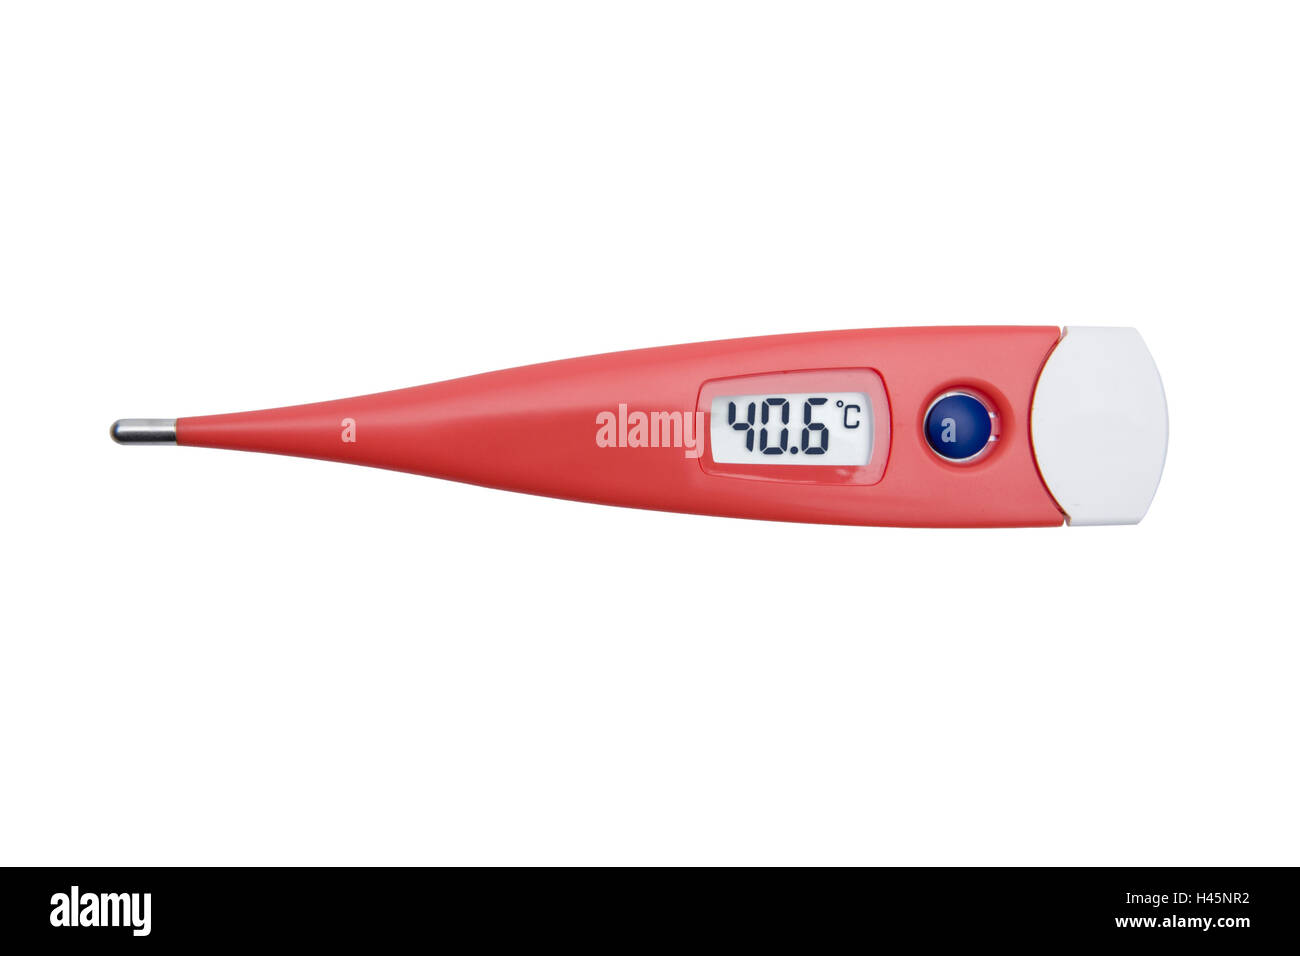 Clinical thermometer, red, digital display 40.6 degrees, Stock Photo